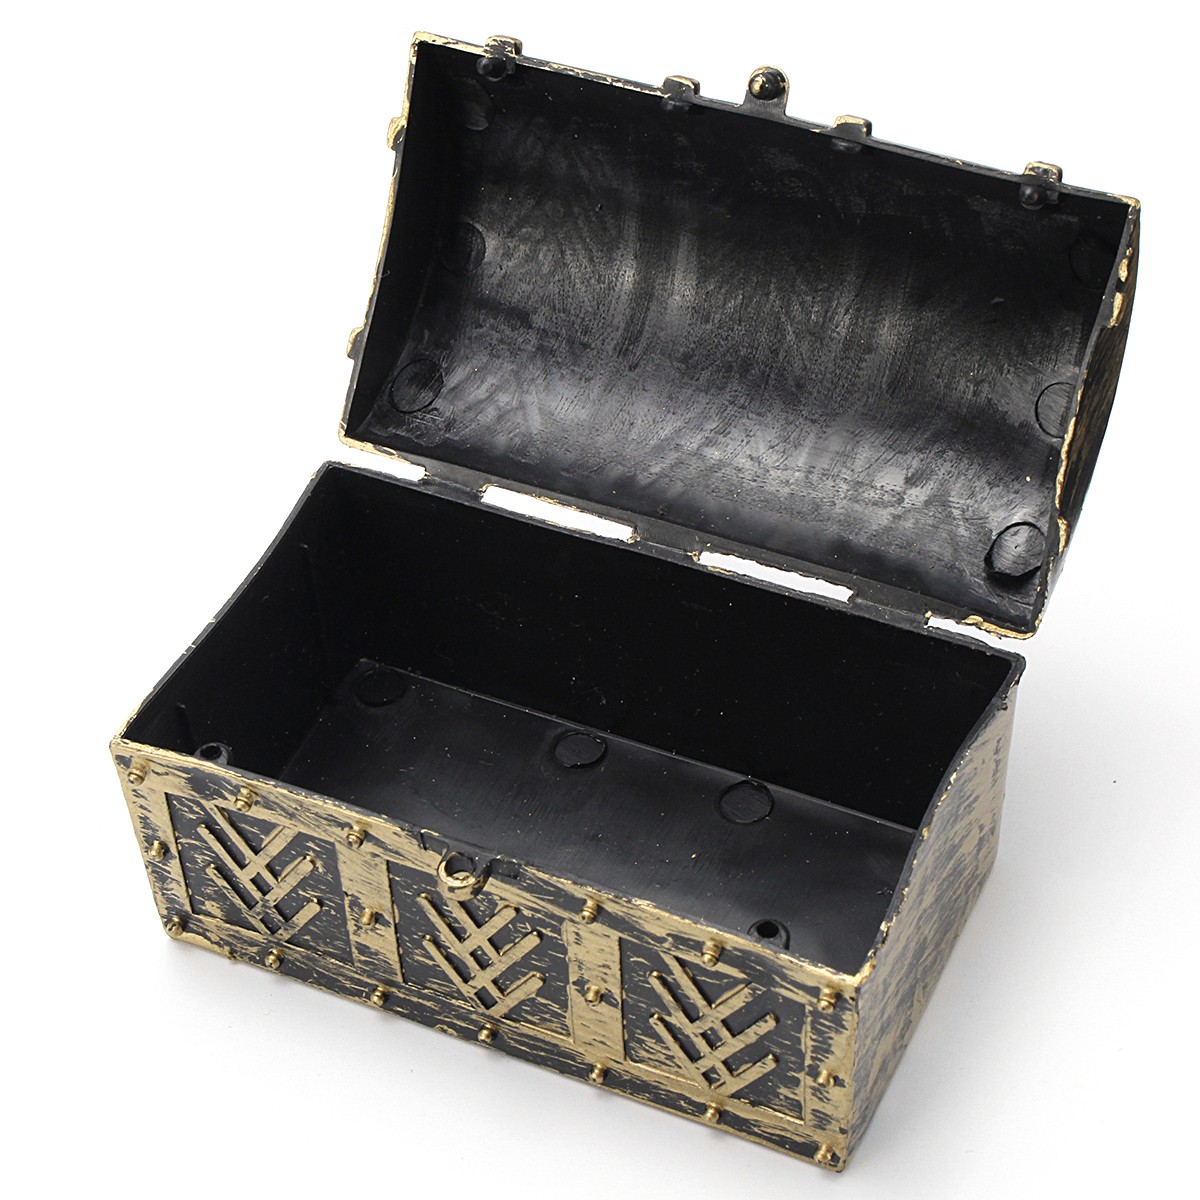 Vintage Pirate Jewelry Storage Box Holder Treasure Chest Gift Box Bag For Necklace Bracelets